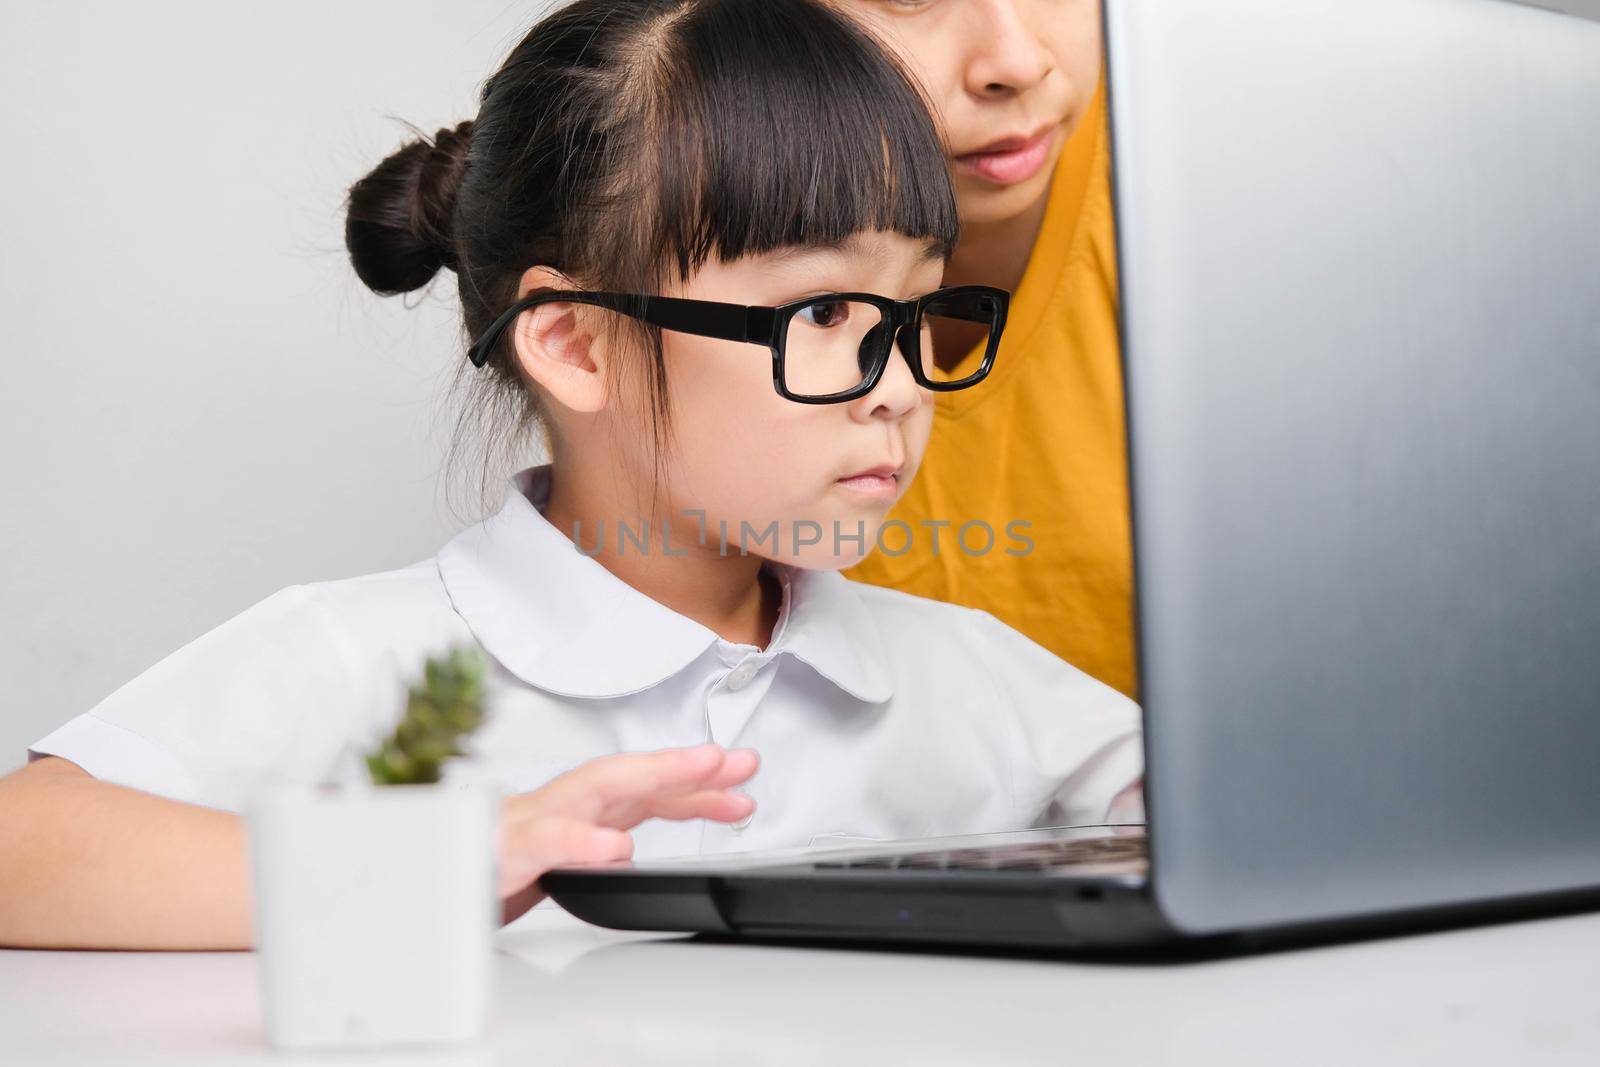 Mother teaches her daughter the basics of business. Little businesswoman with laptop working in office with mother. Children and business concepts by TEERASAK